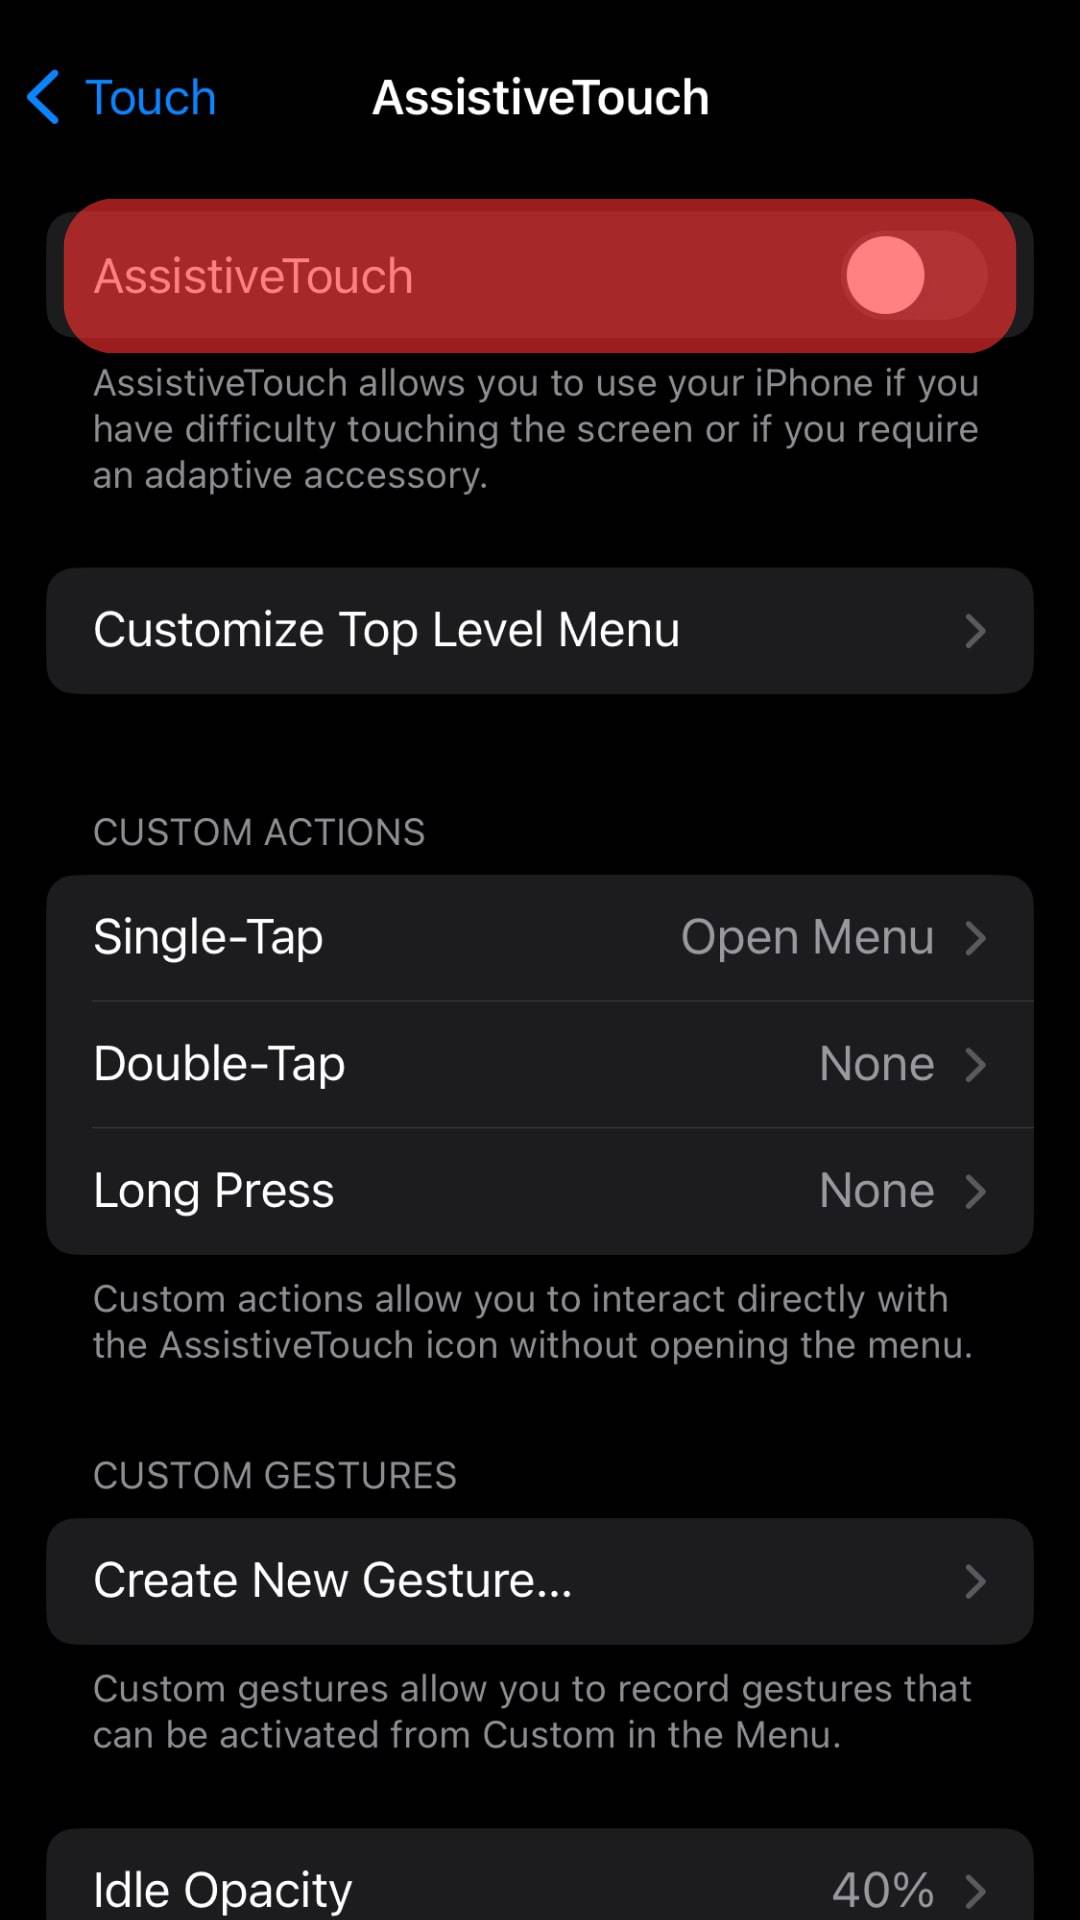 Toggle On The Assistive Touch Option